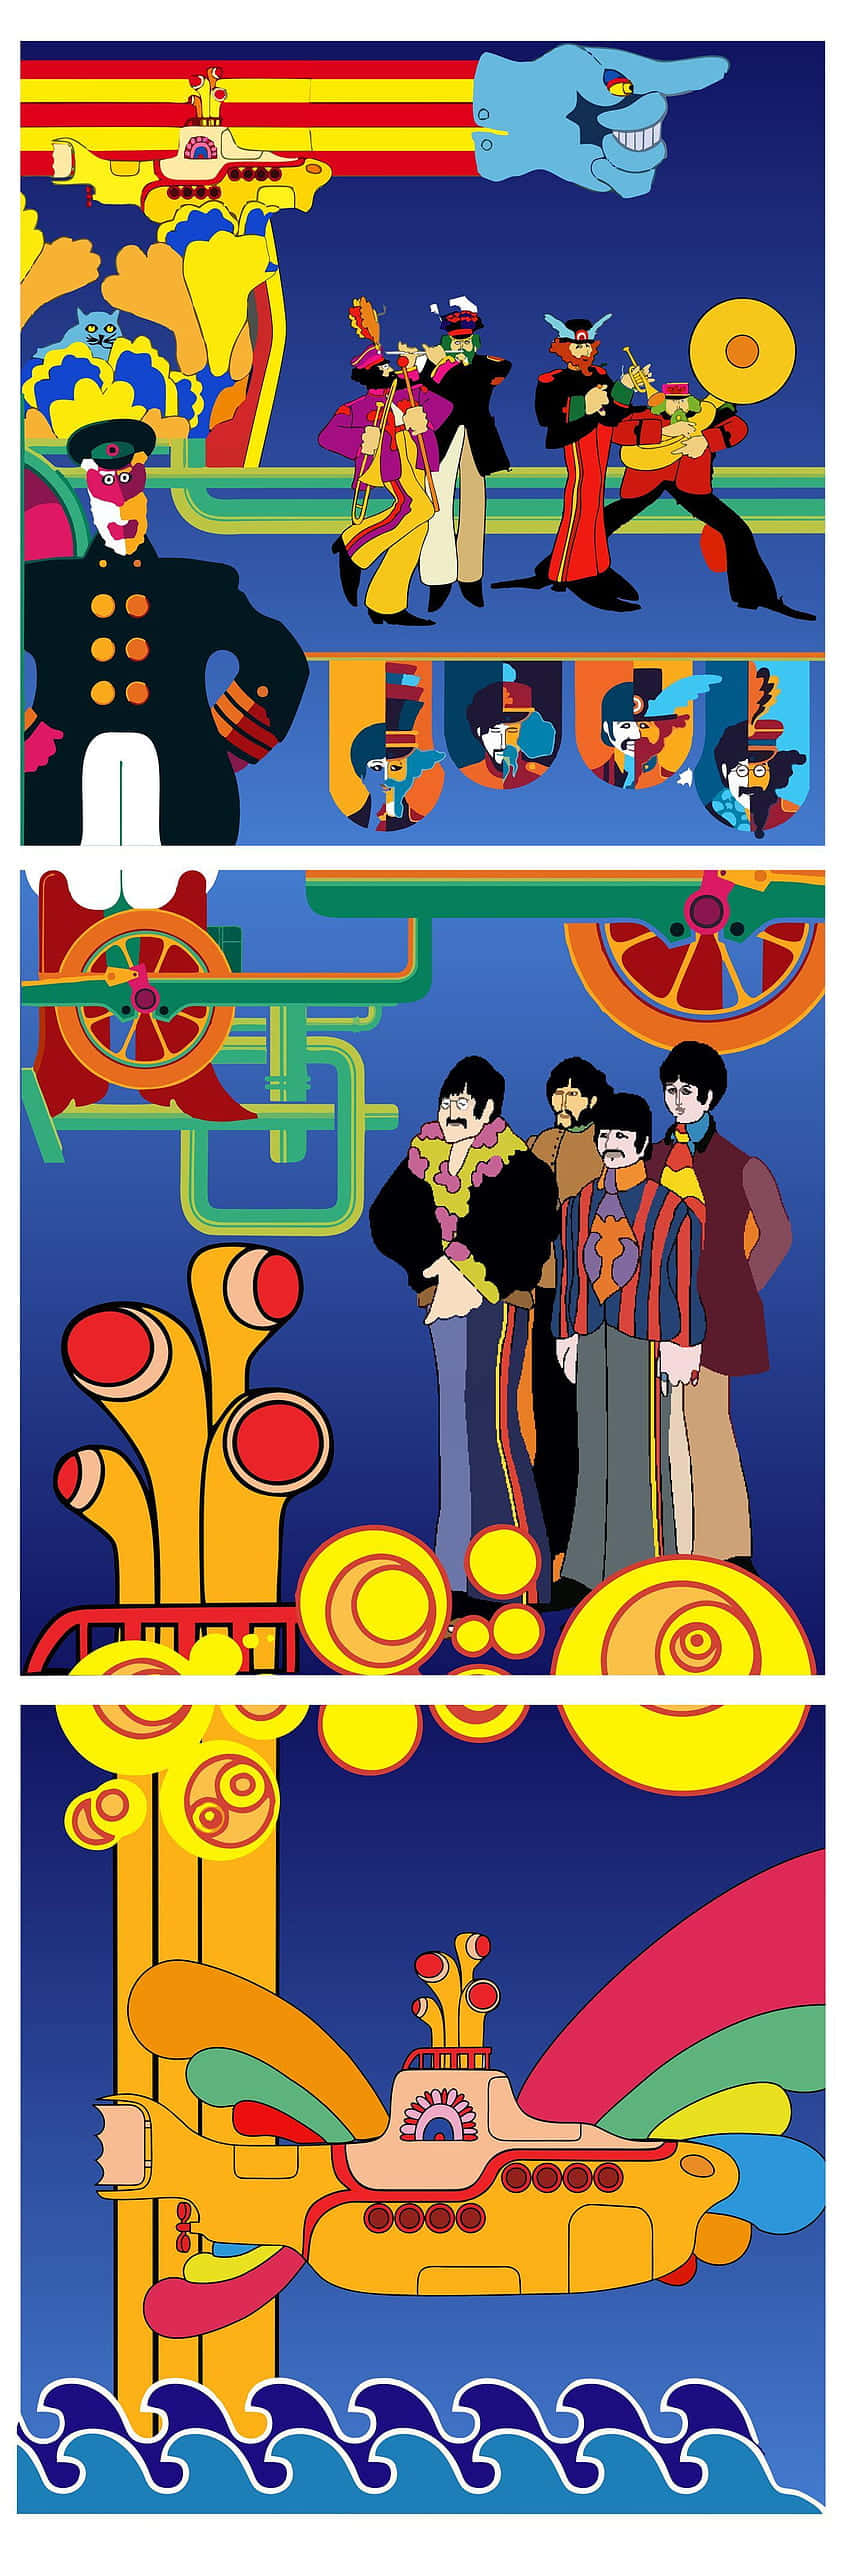 Colorful Yellow Submarine in an underwater adventure Wallpaper